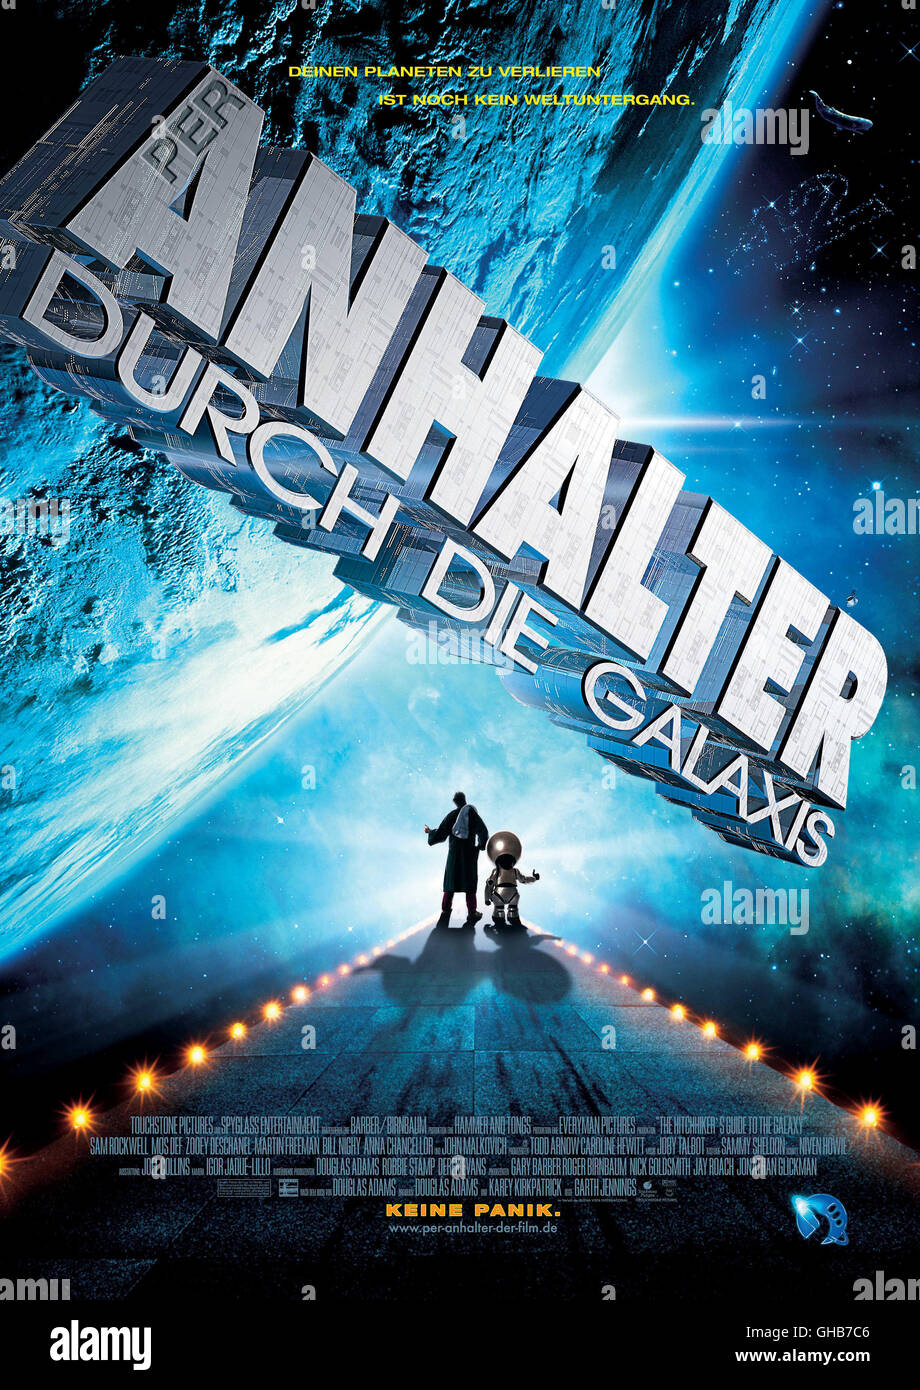 PER ANHALTER DURCH DIE GALAXIS The Hitchhikers Guide to the Galaxy USA/UK  2005 Garth Jennings Filmplakat Regie: Garth Jennings aka. The Hitchhikers  Guide to the Galaxy Stock Photo - Alamy